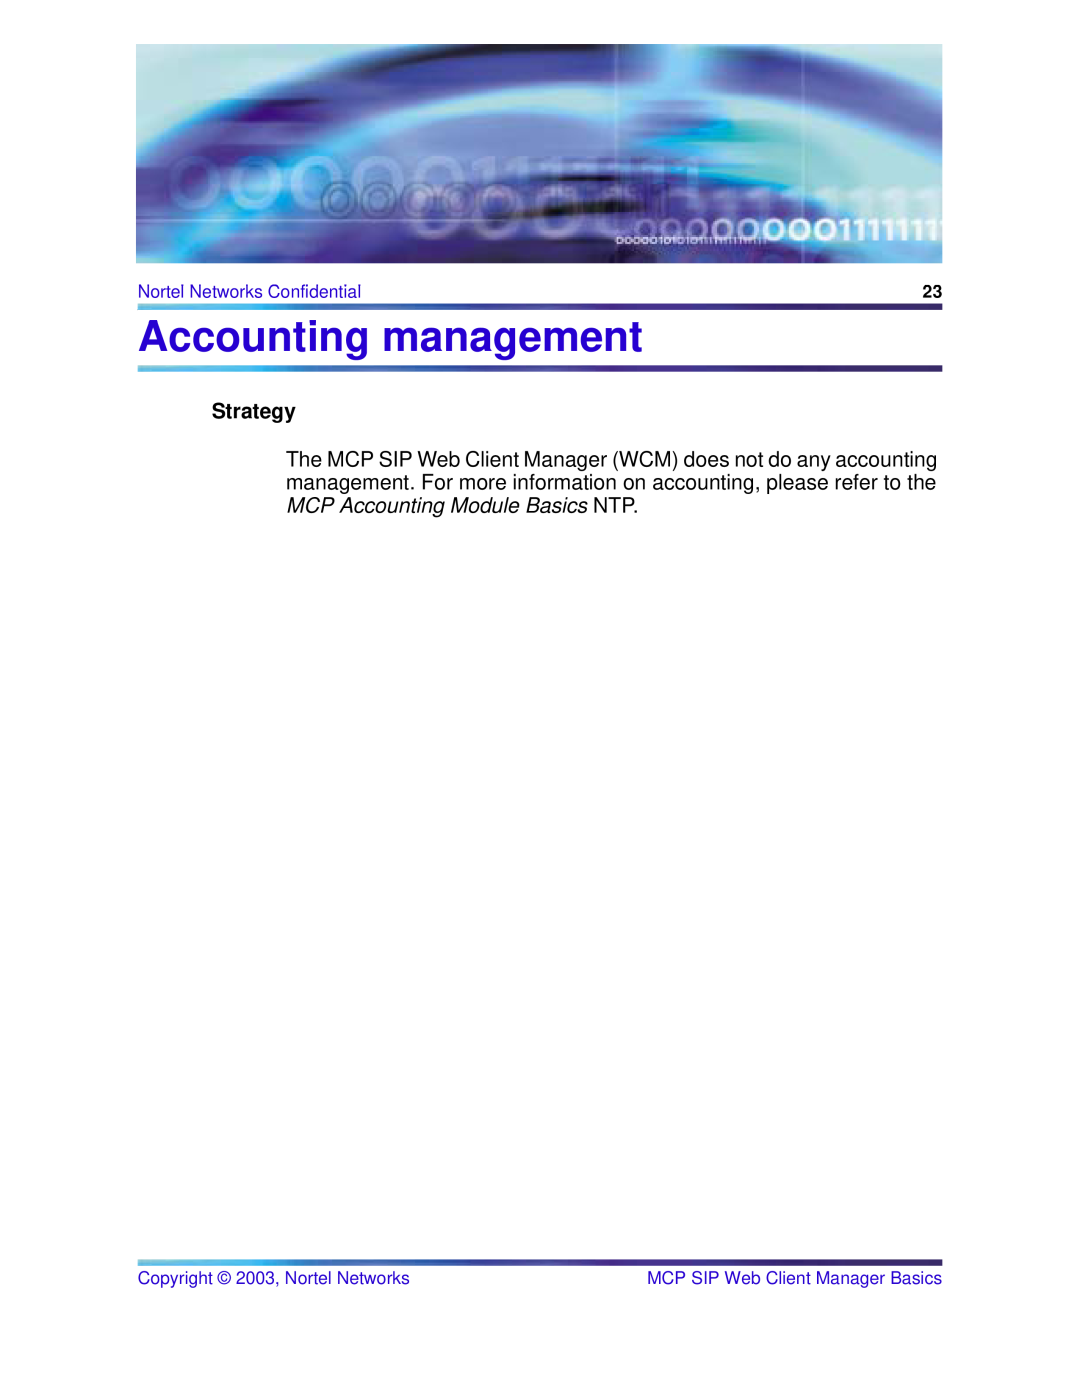 Nortel Networks NN10277-111 Accounting management, Strategy, Nortel Networks Confidential, Copyright 2003, Nortel Networks 